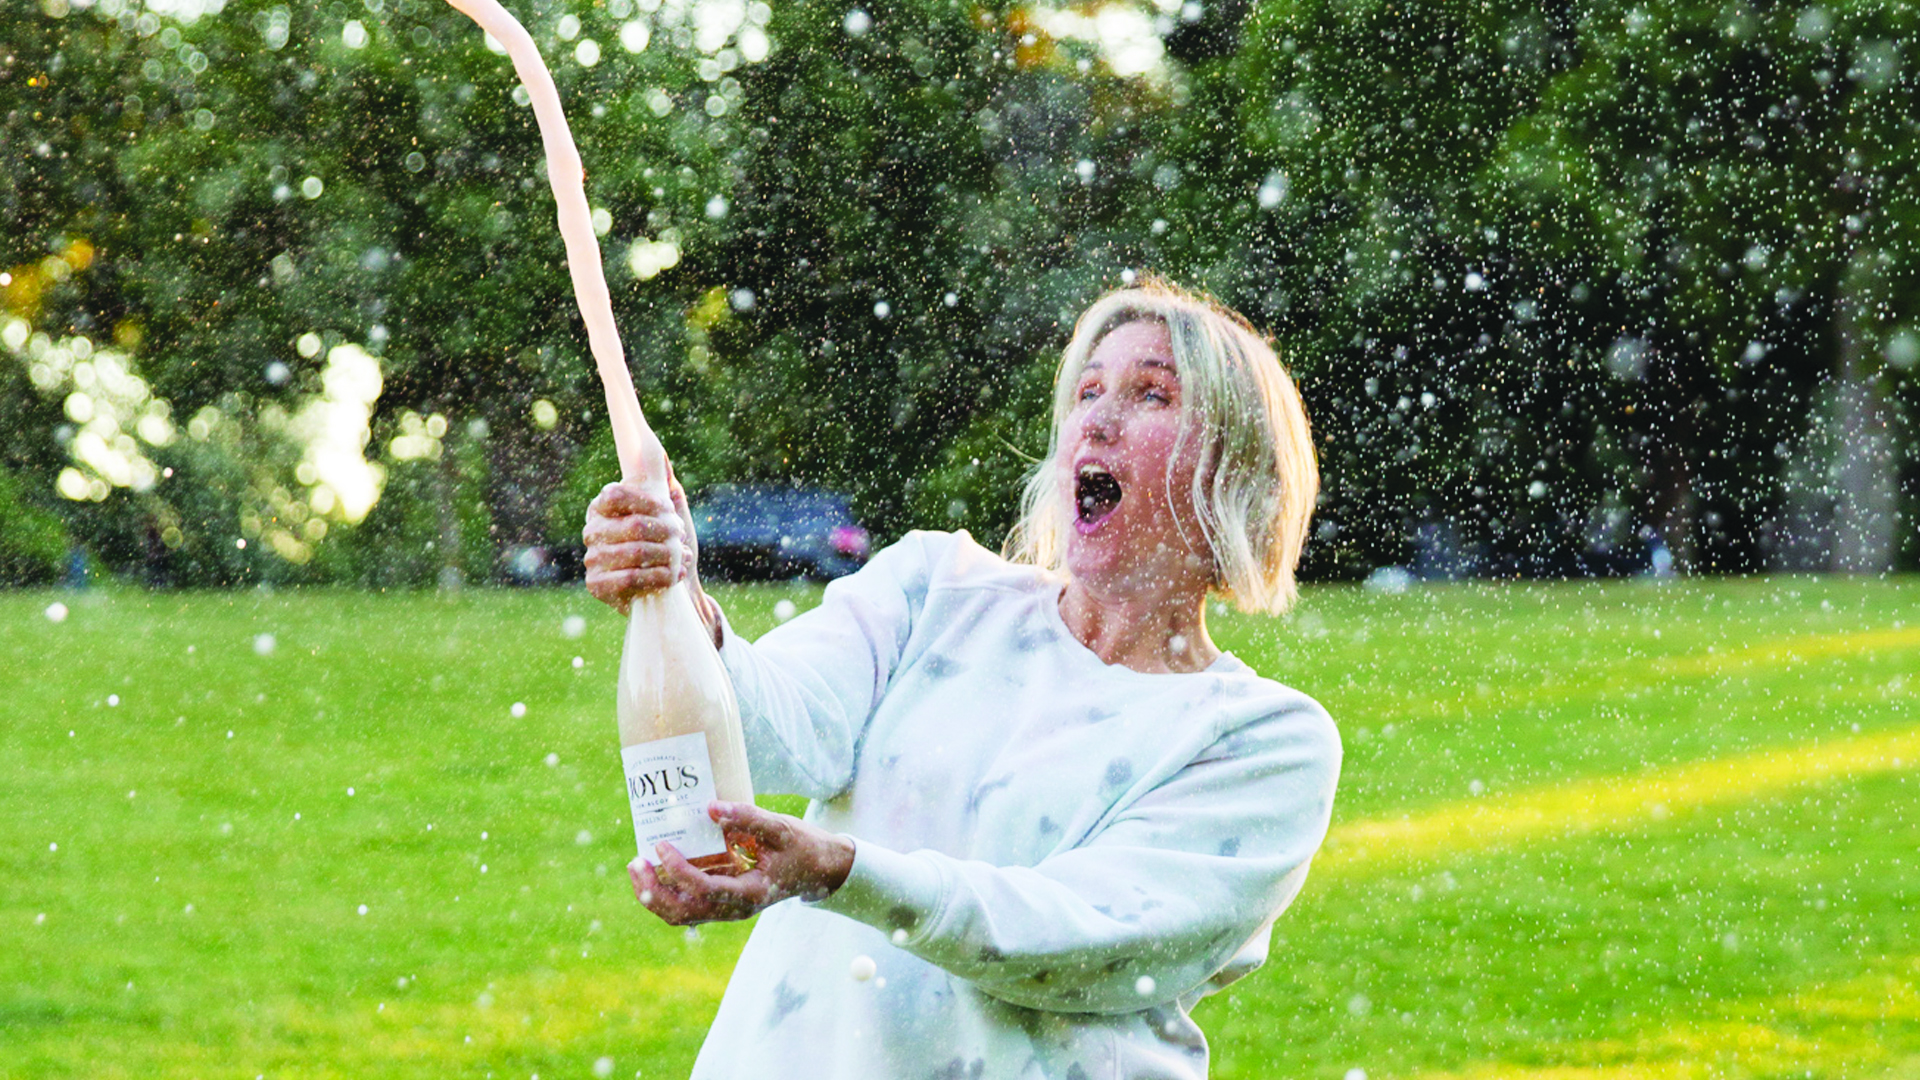 Popping a cork of sparkling wine bottle